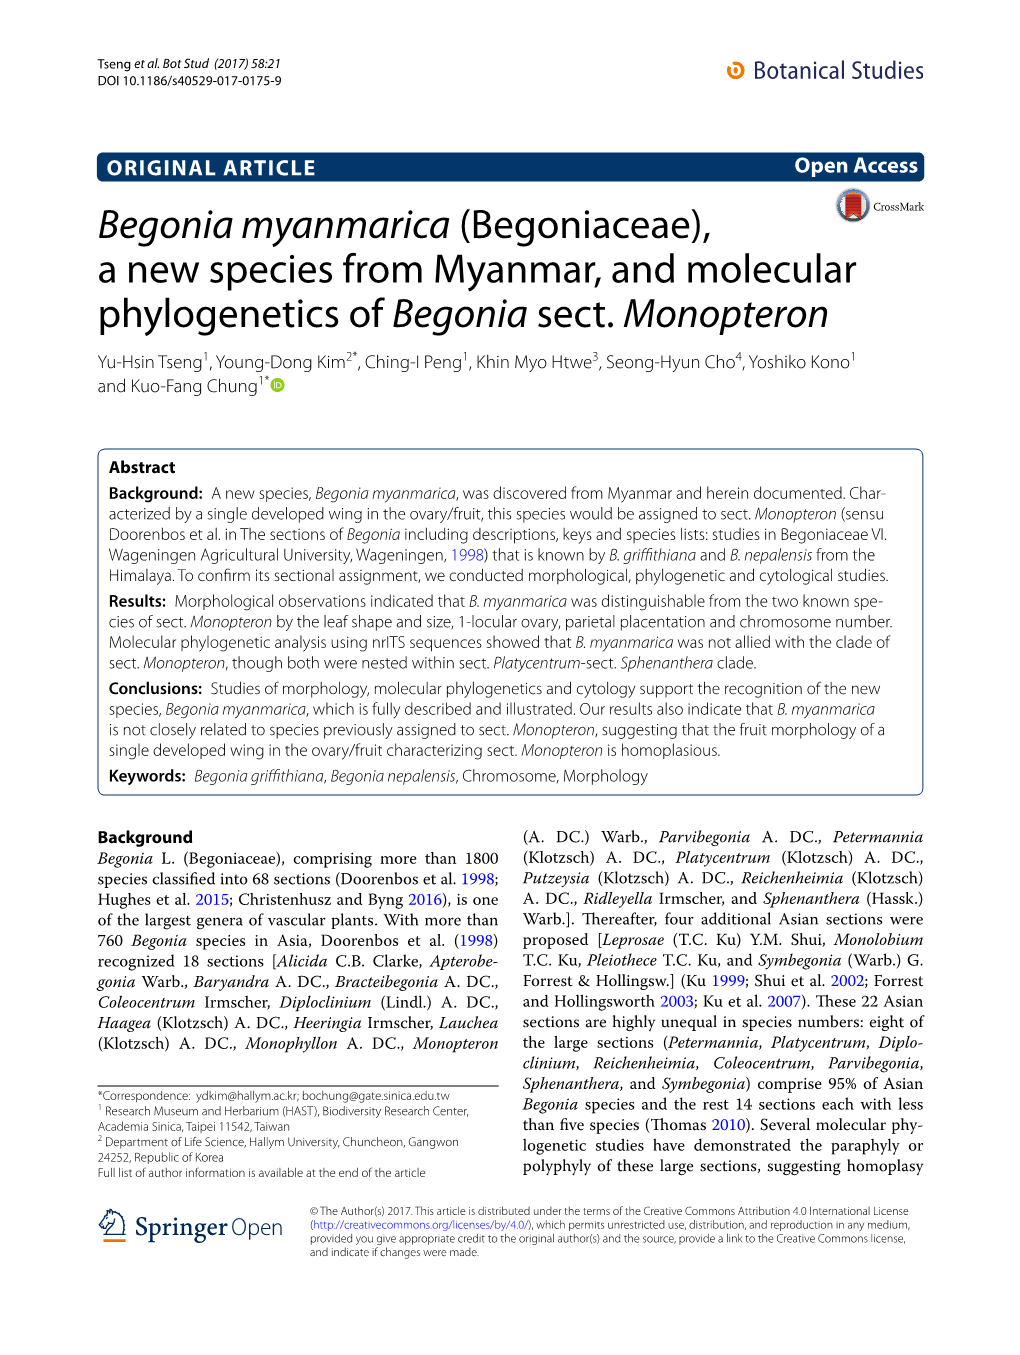 Begonia Myanmarica (Begoniaceae), a New Species from Myanmar, and Molecular Phylogenetics of Begonia Sect